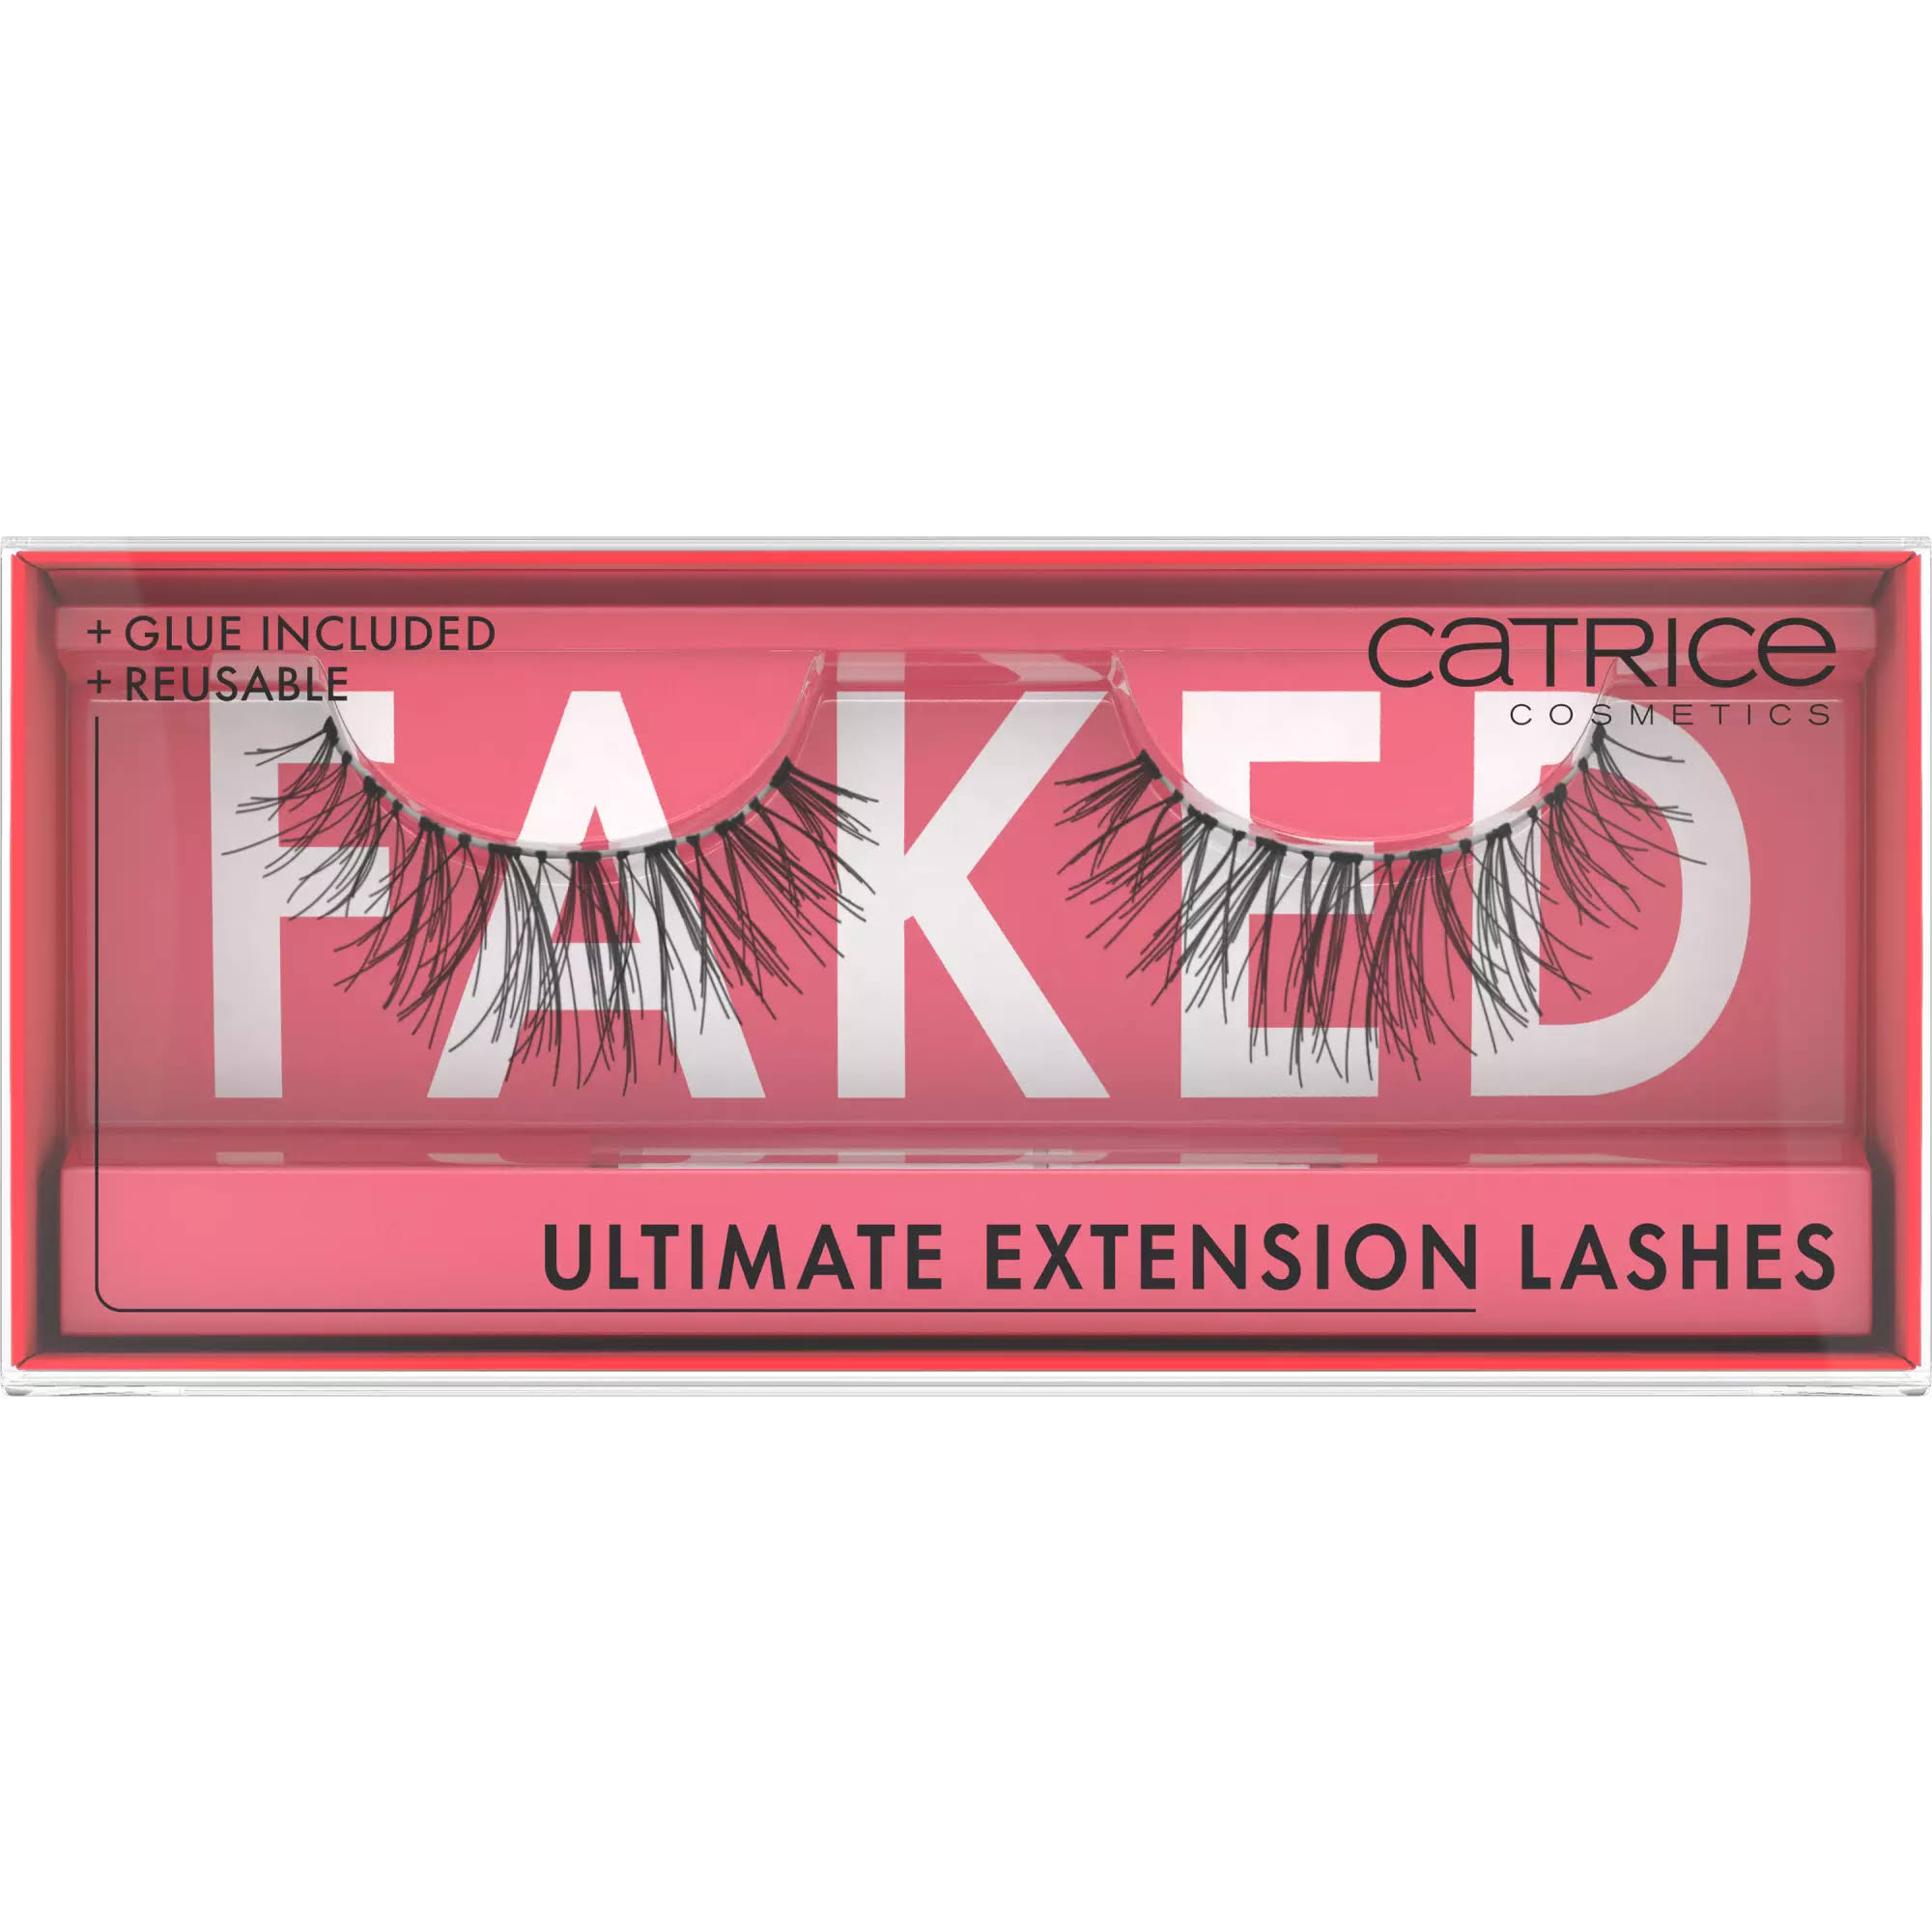 Catrice Faked Ultimate Extension Lashes X1 Pair